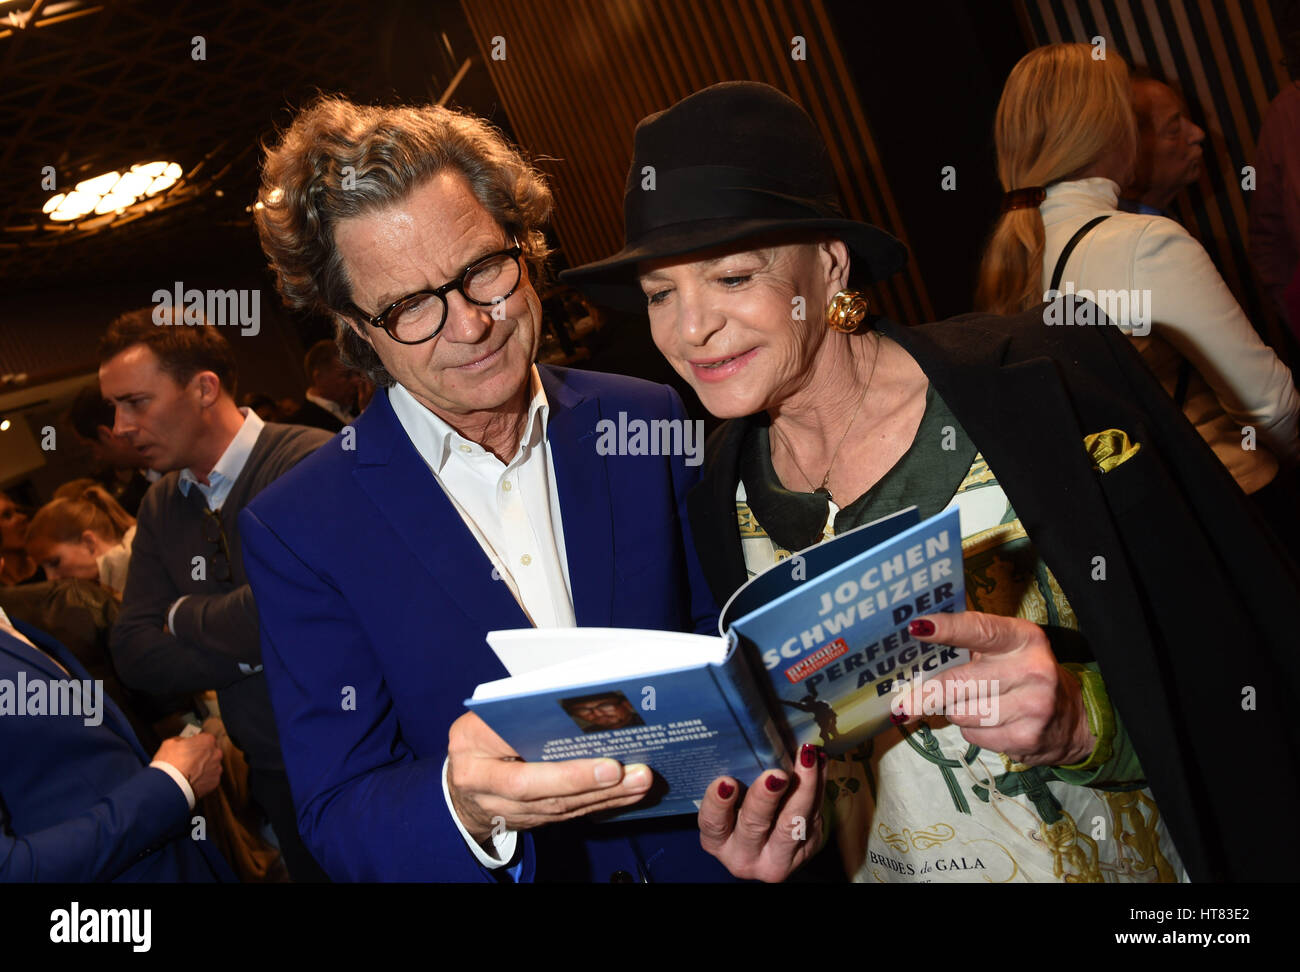 Taufkirchen, Germany. 08th Mar, 2017. Publisher Florian Langenscheidt and designer Barbara Engel holding a book by Jochen Schweizer at the so-called red carpet opening of a theme park at the Jochen Schweizer Arena in Taufkirchen, Germany, 08 March 2017. Photo: Felix Hörhager/dpa/Alamy Live News Stock Photo